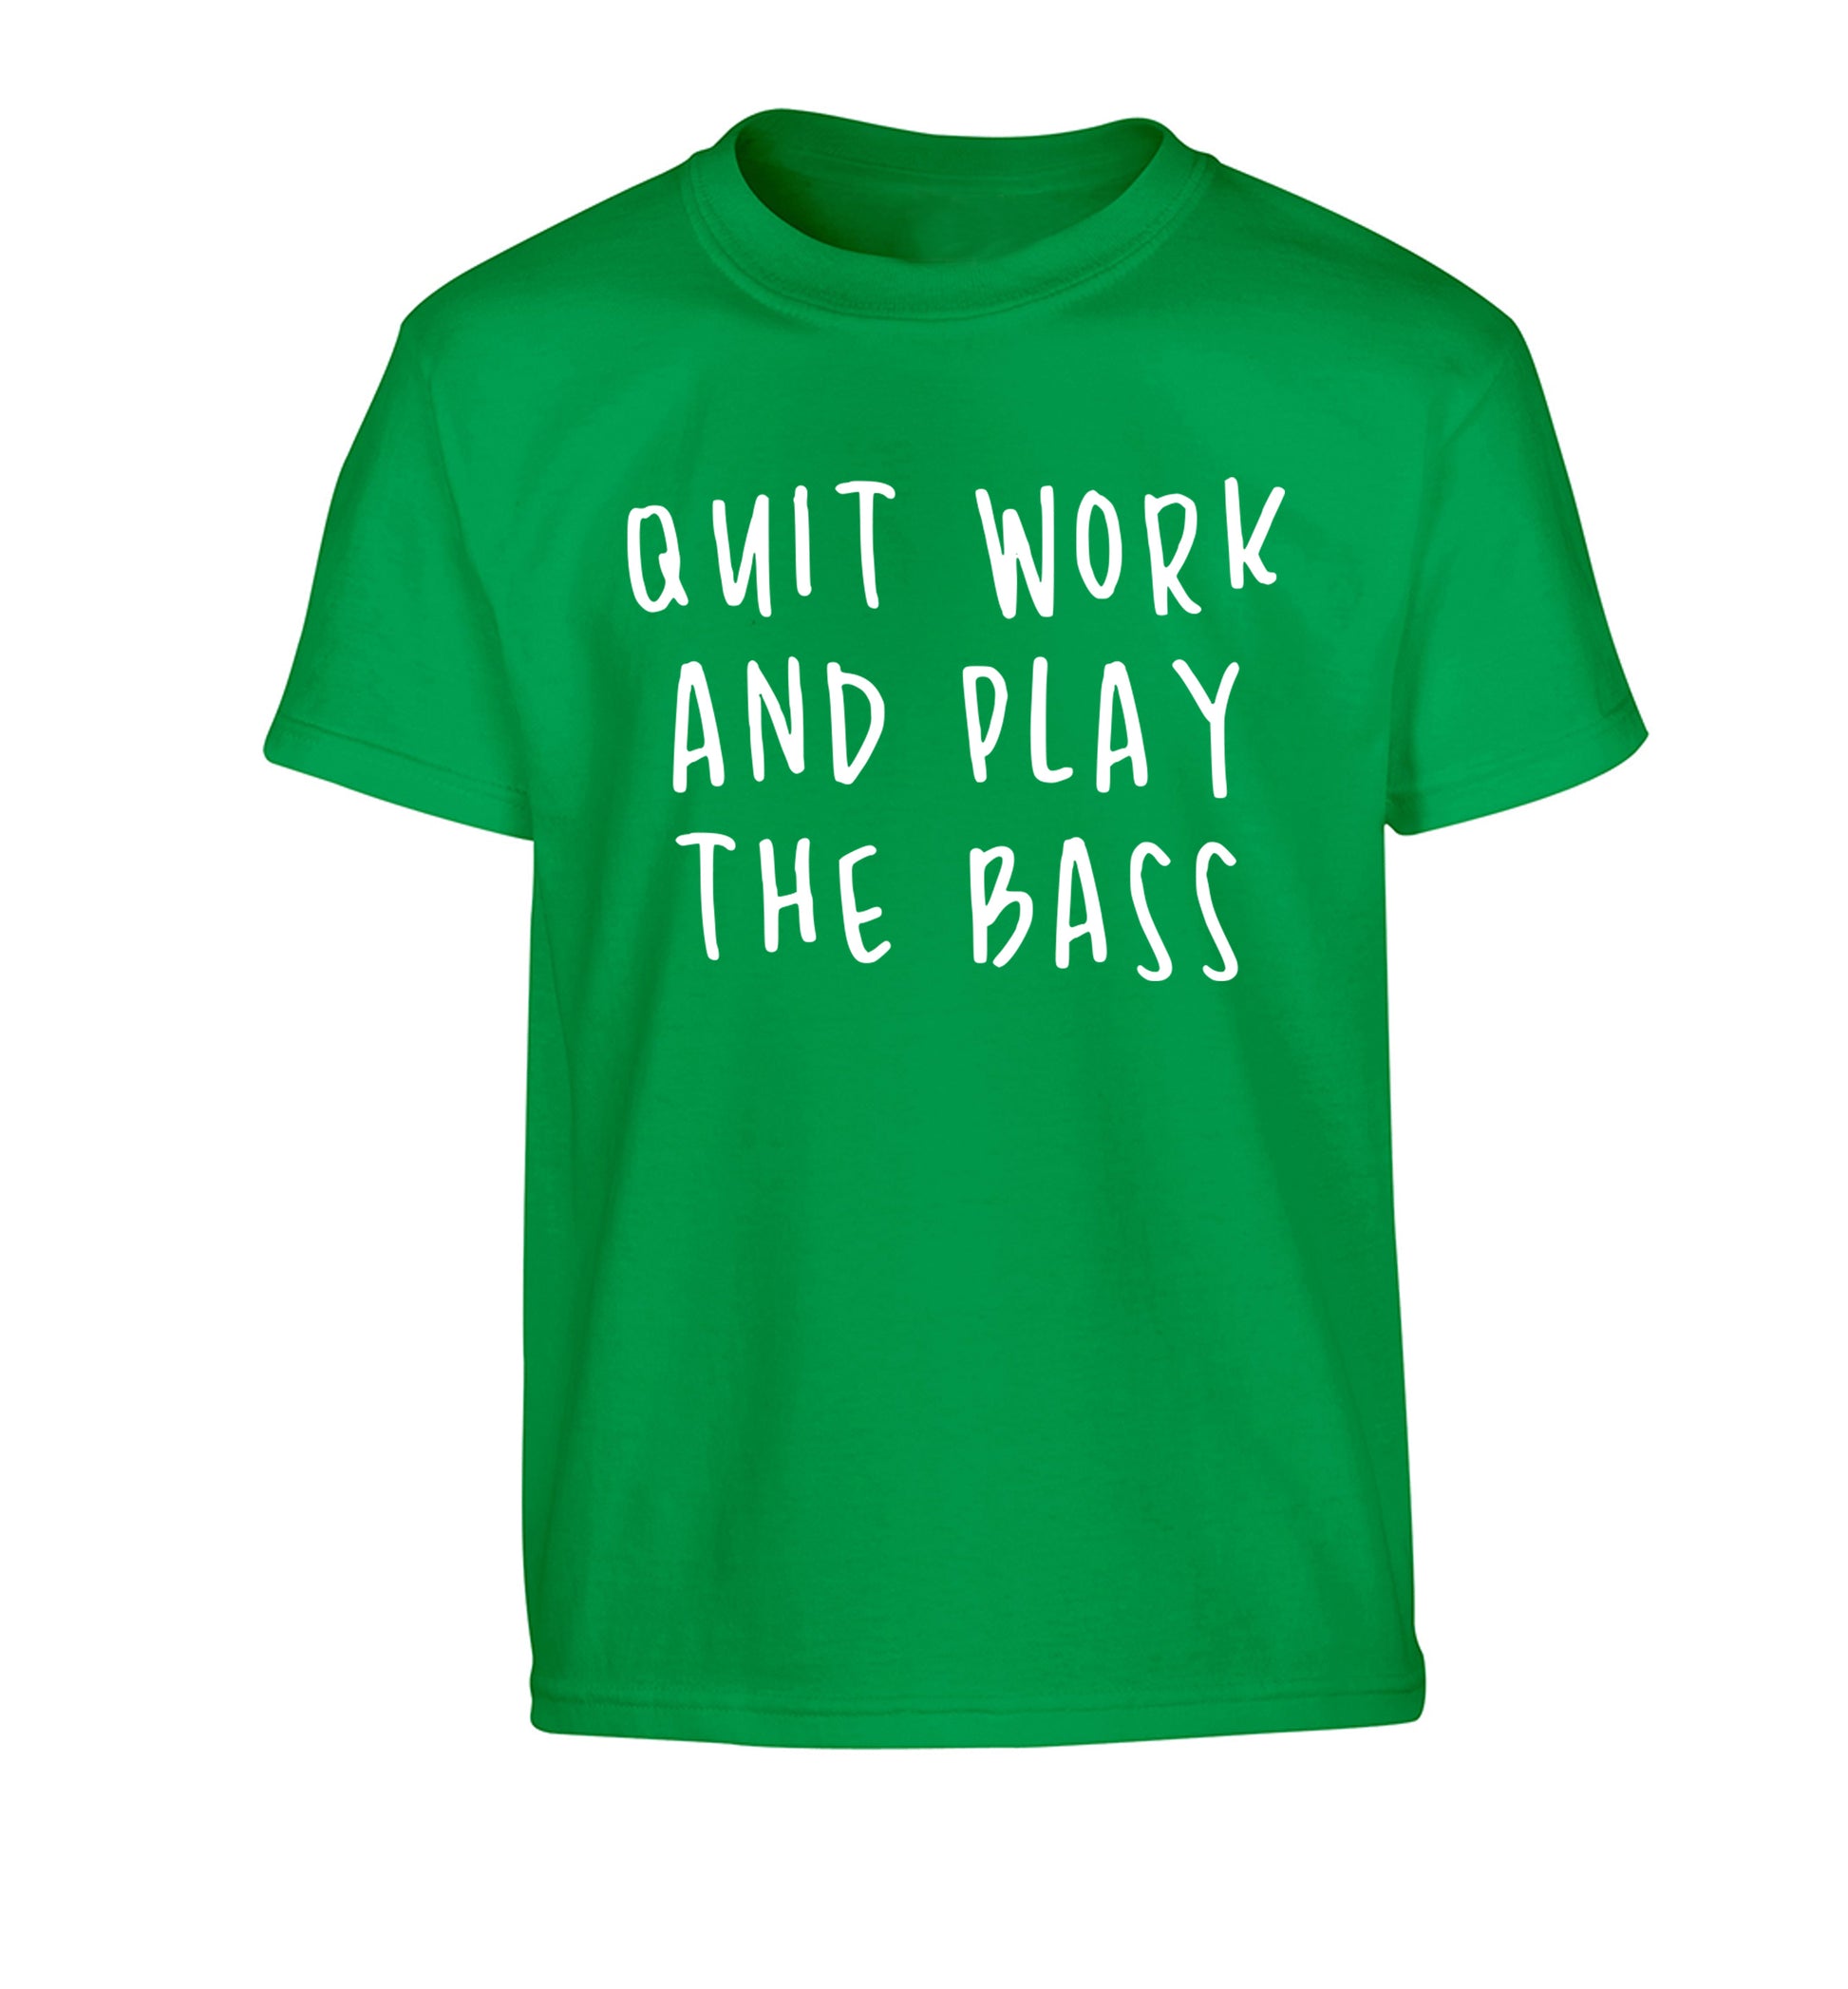 Quit work and play the bass Children's green Tshirt 12-14 Years